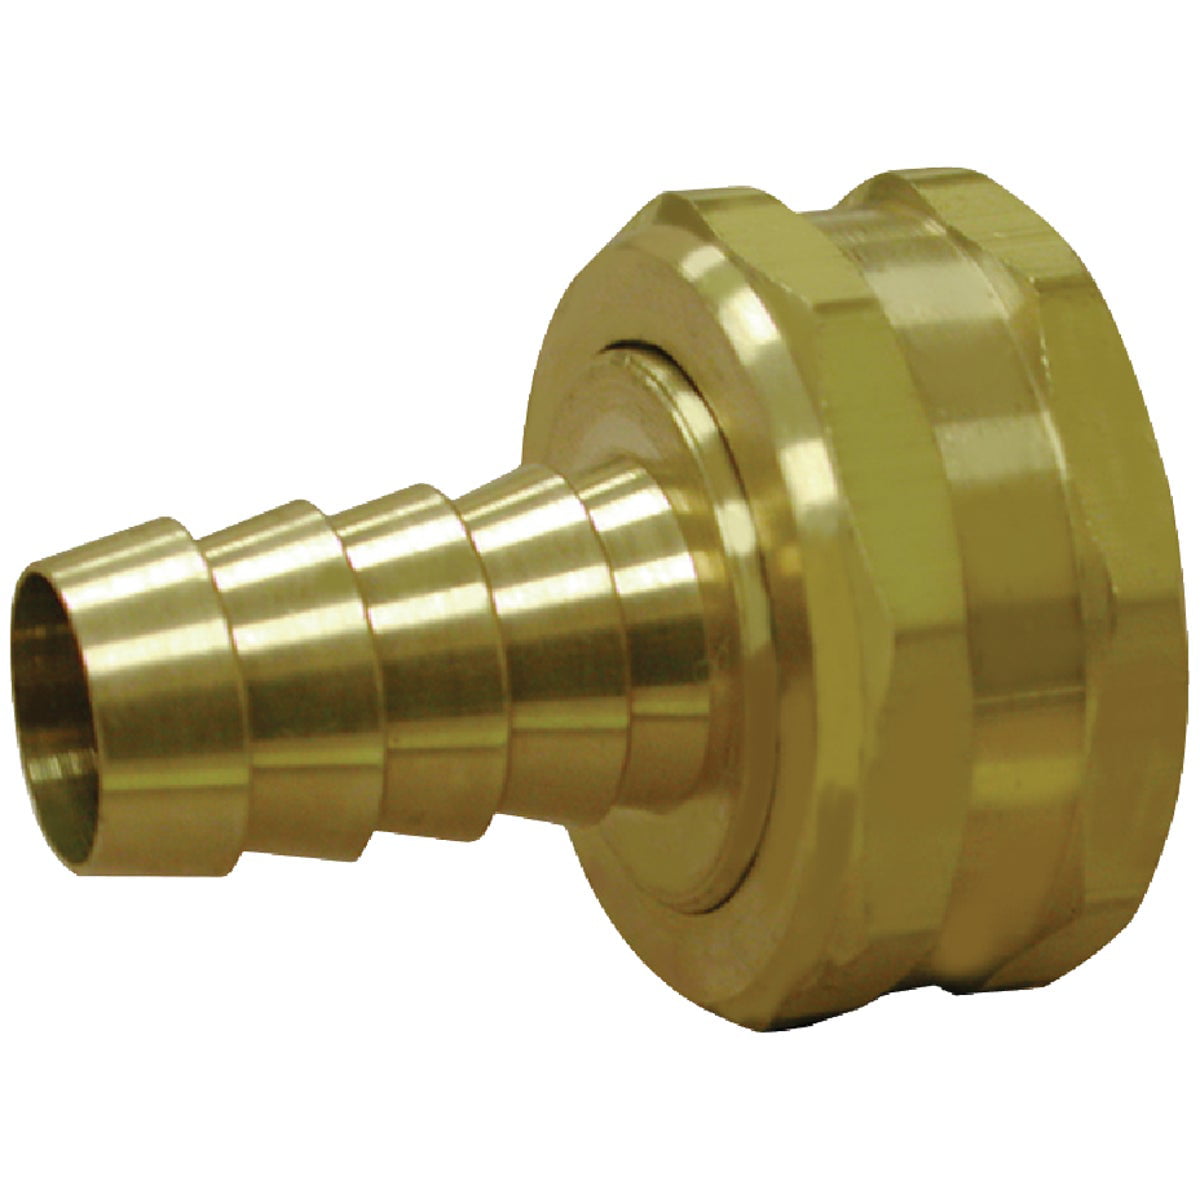 1/2 Barb x 3/8 Male Pipe Swivel Connector Anderson Metals Brass Hose Fitting 